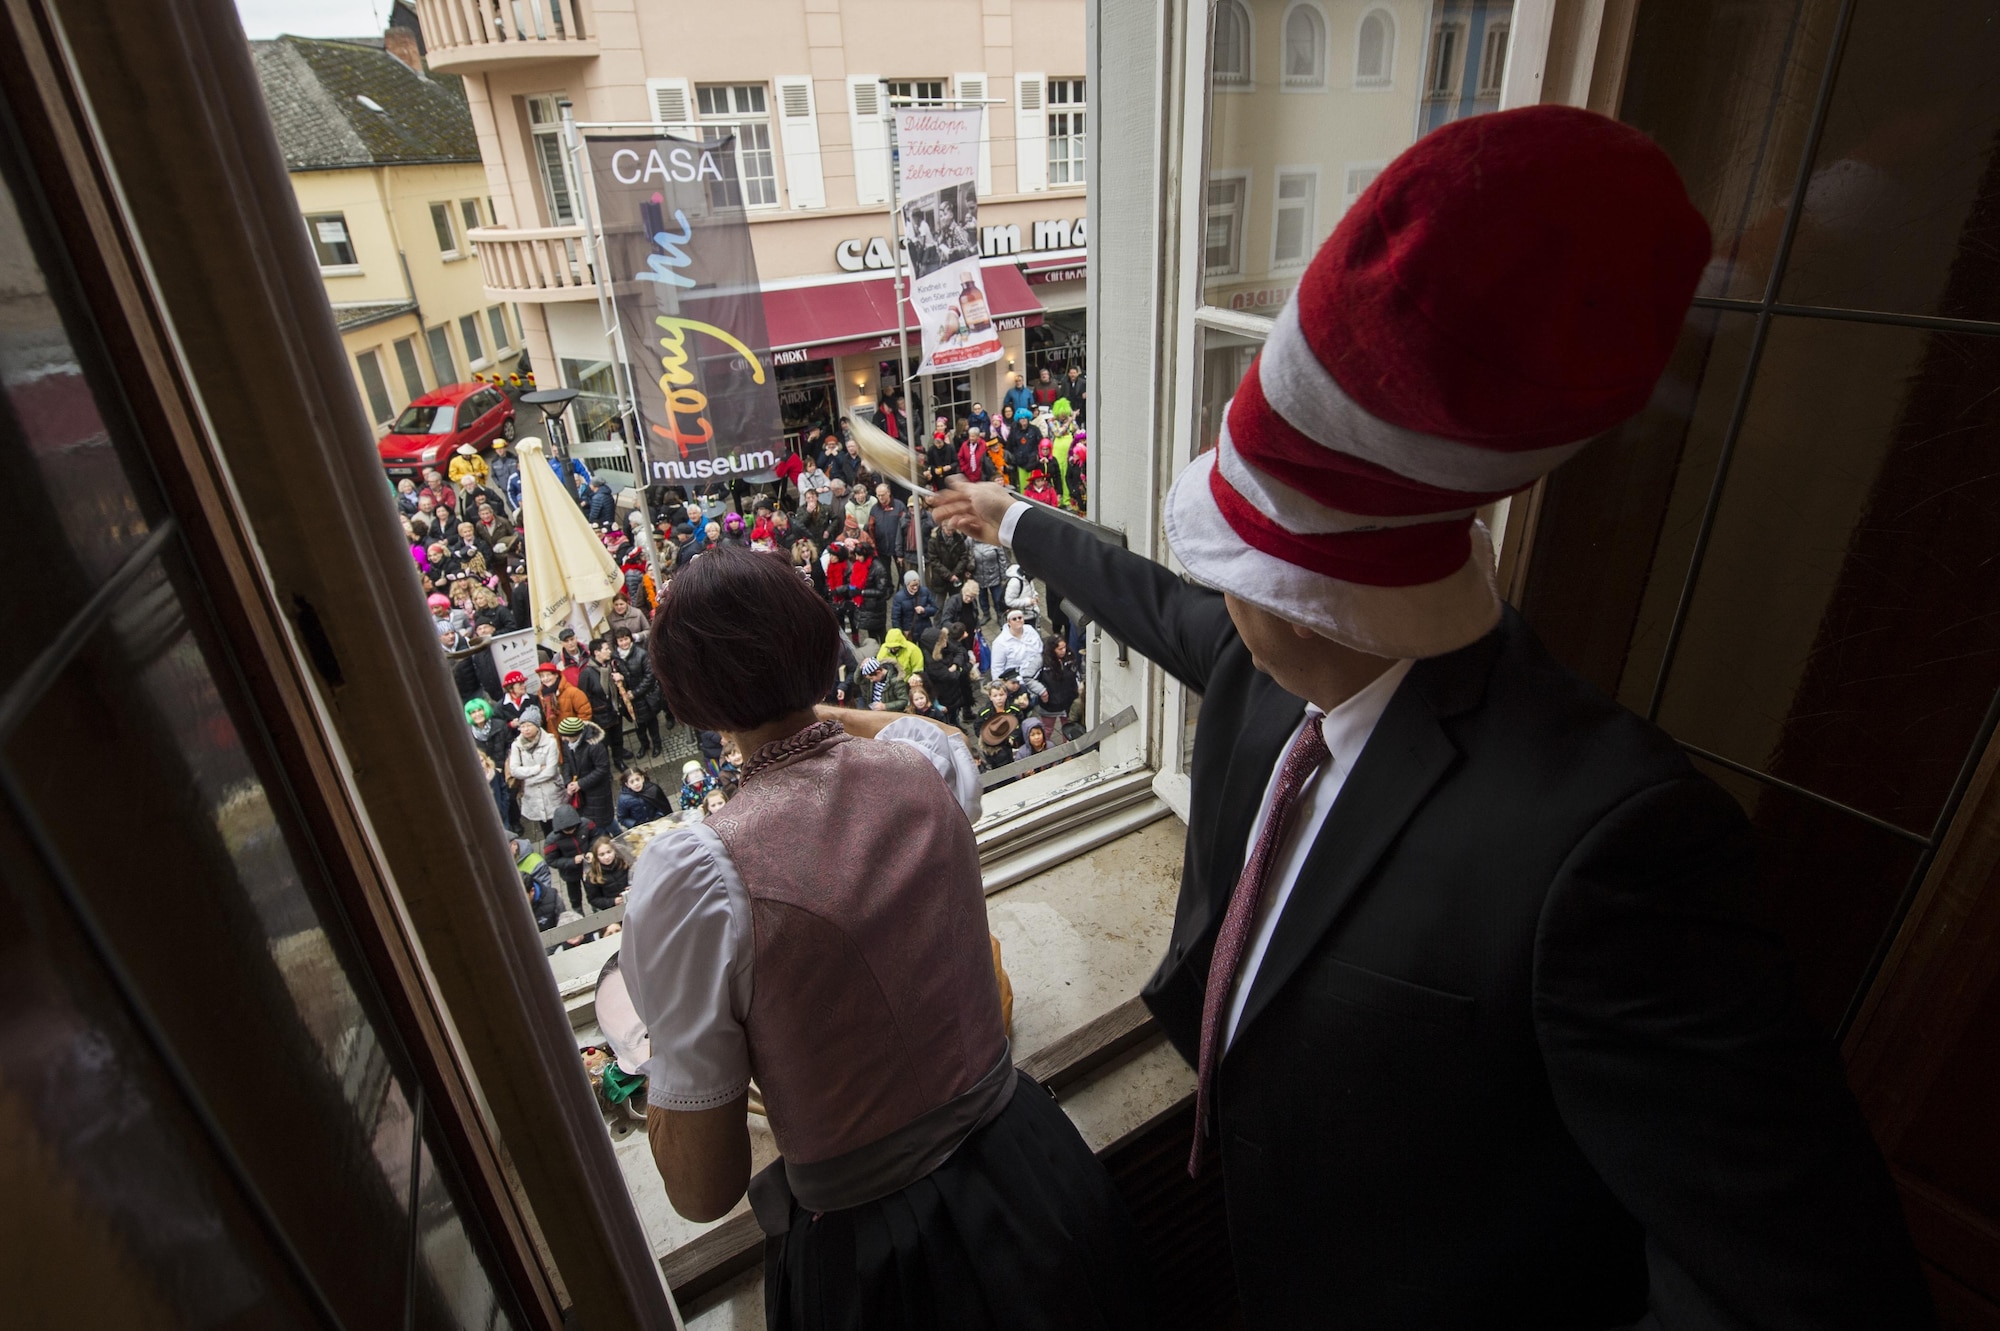 Col. Steven Zubowicz, 52nd Mission Support Group commander, throws candy to the crowd below city hall during a Fasching celebration in Wittlich, Germany, Feb. 23, 2017. The celebration included a tradition of female citizens storming the city hall to seize control of the community for the day. (U.S. Air Force photo by Staff Sgt. Jonathan Snyder)